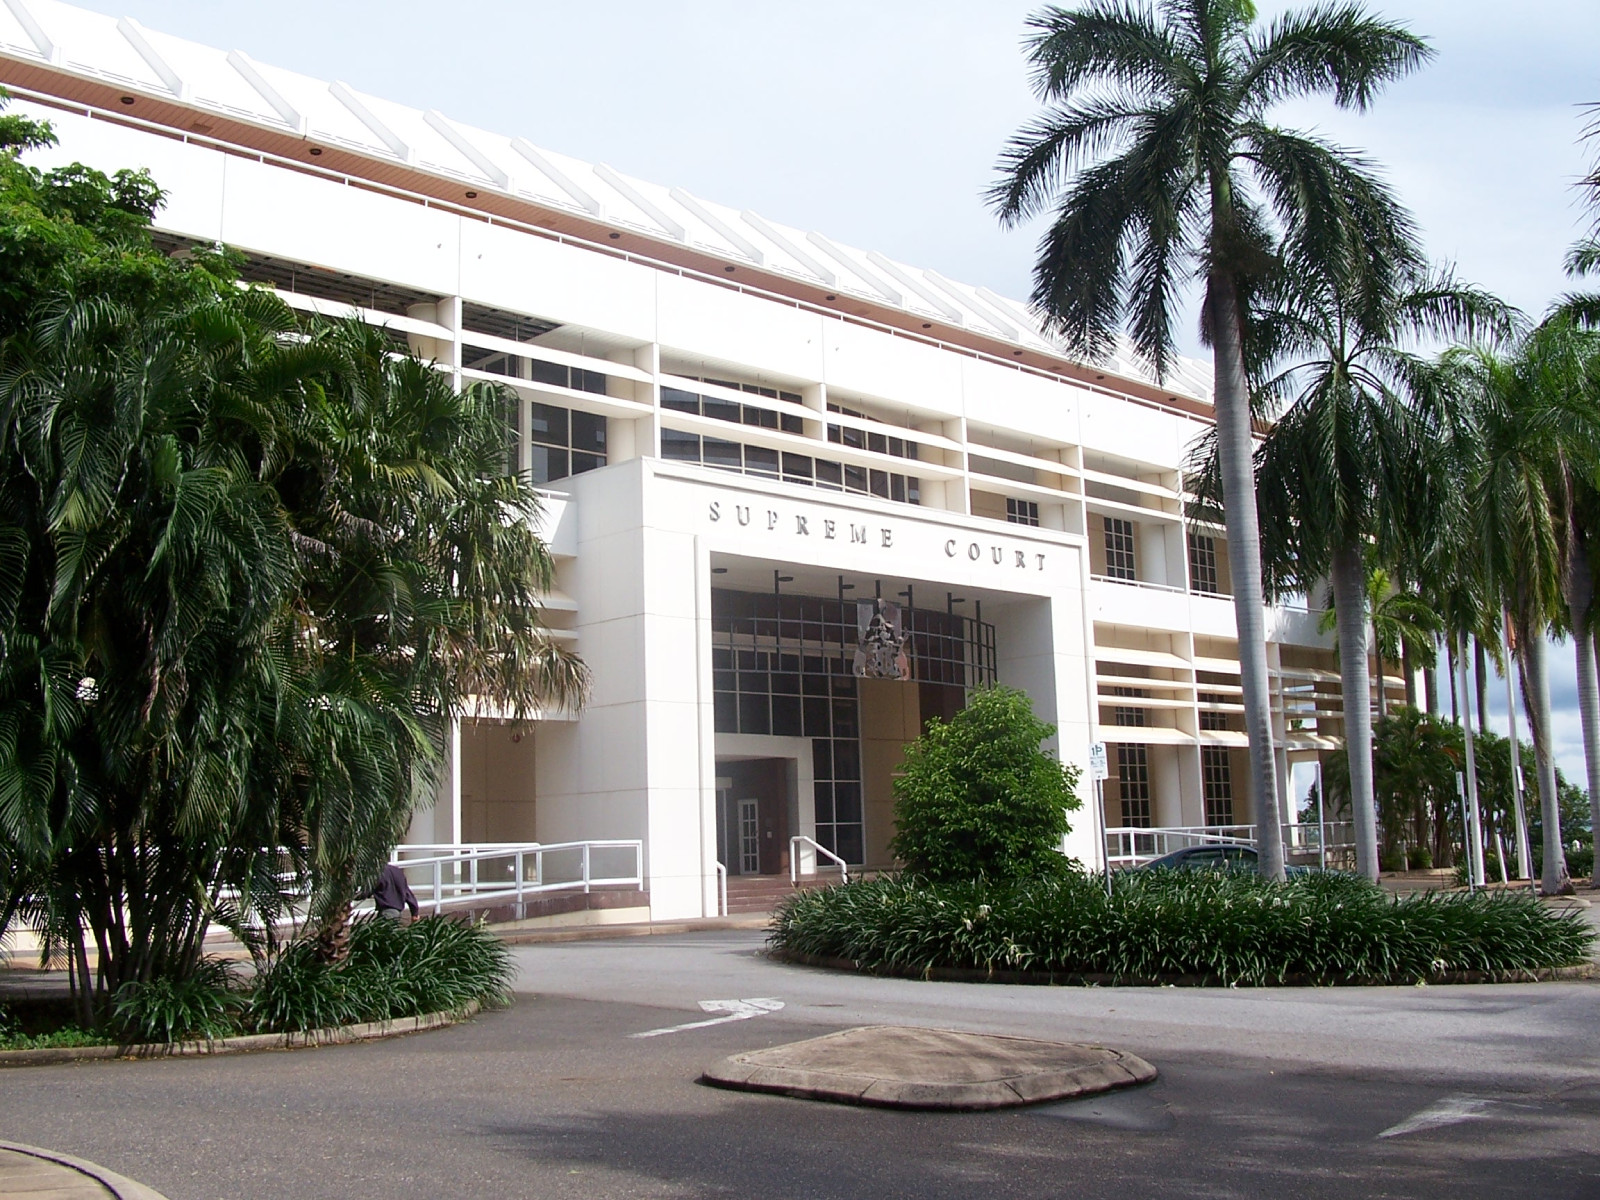 Road leading to the entrance of the Darwin Supreme Court